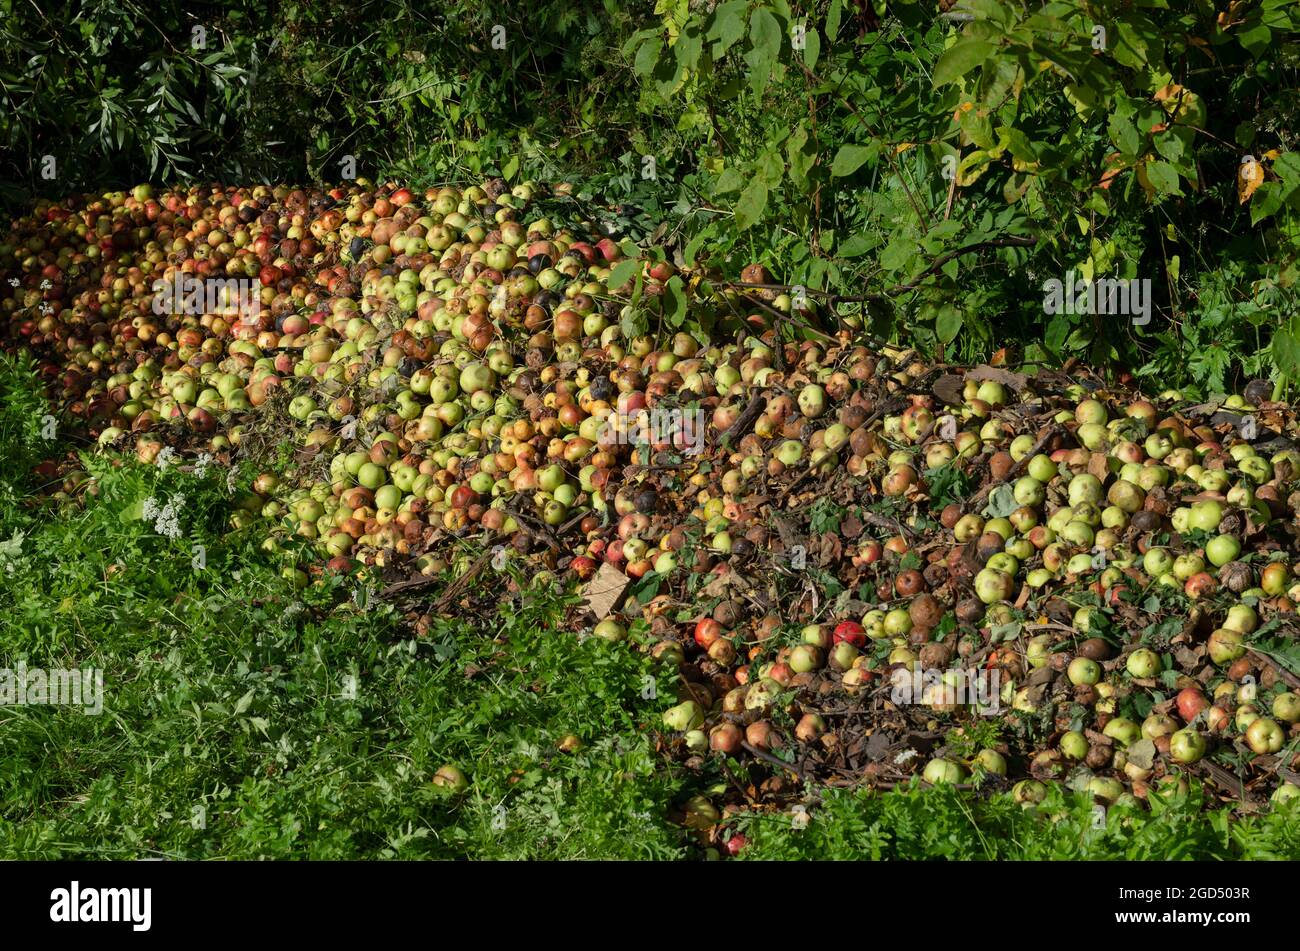 Spoiled apples in a big pile on the outskirts of an orchard in the village Stock Photo